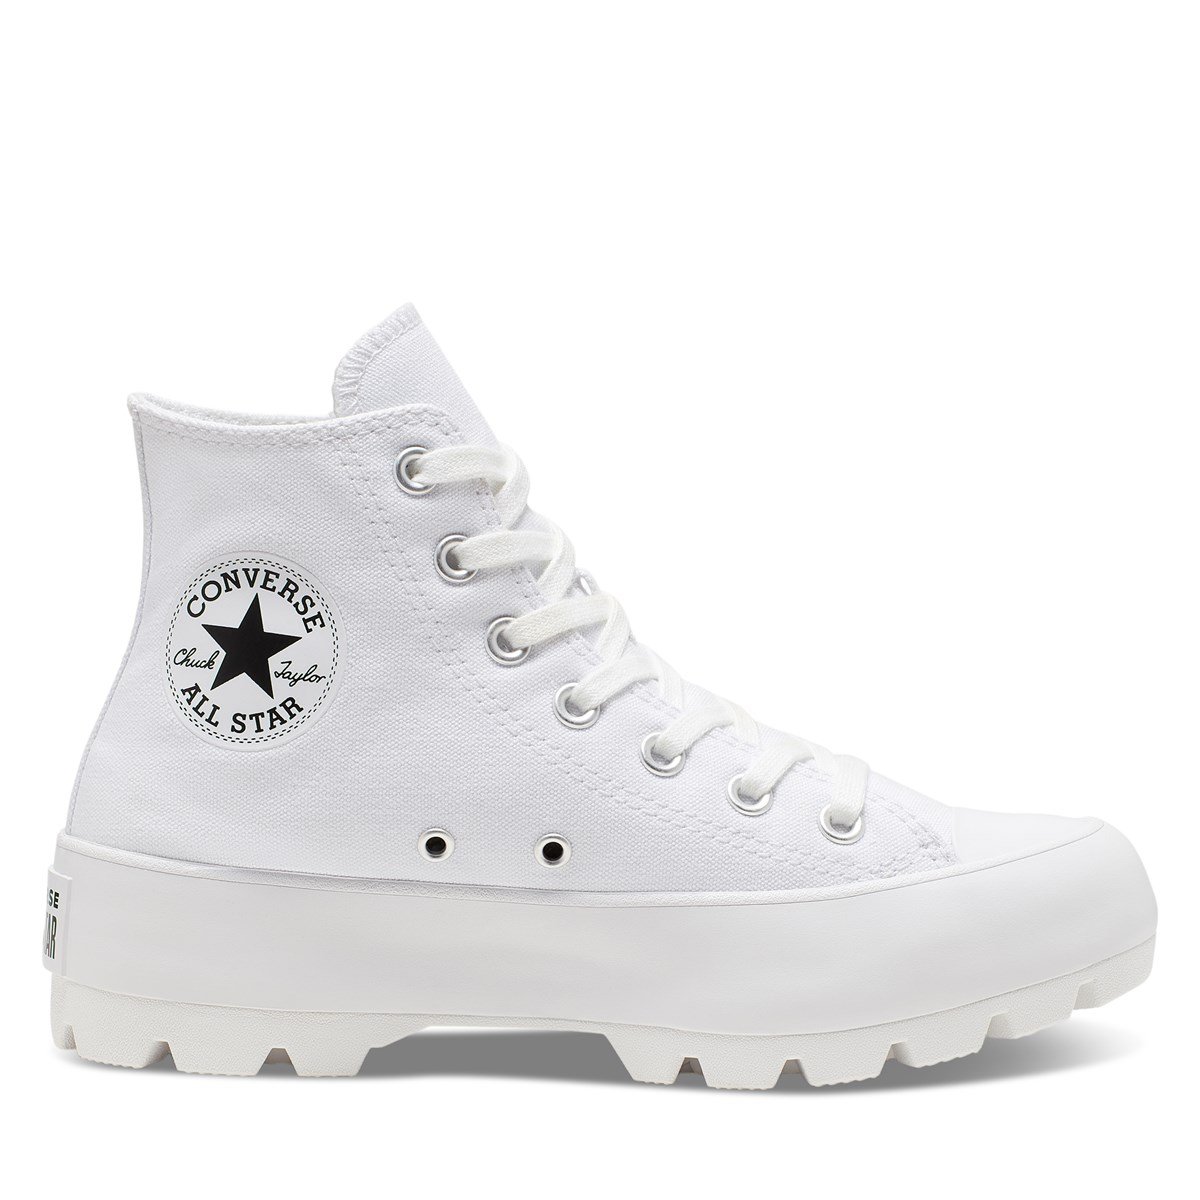 Women's Chuck Taylor Hi Lugged Sneakers in White